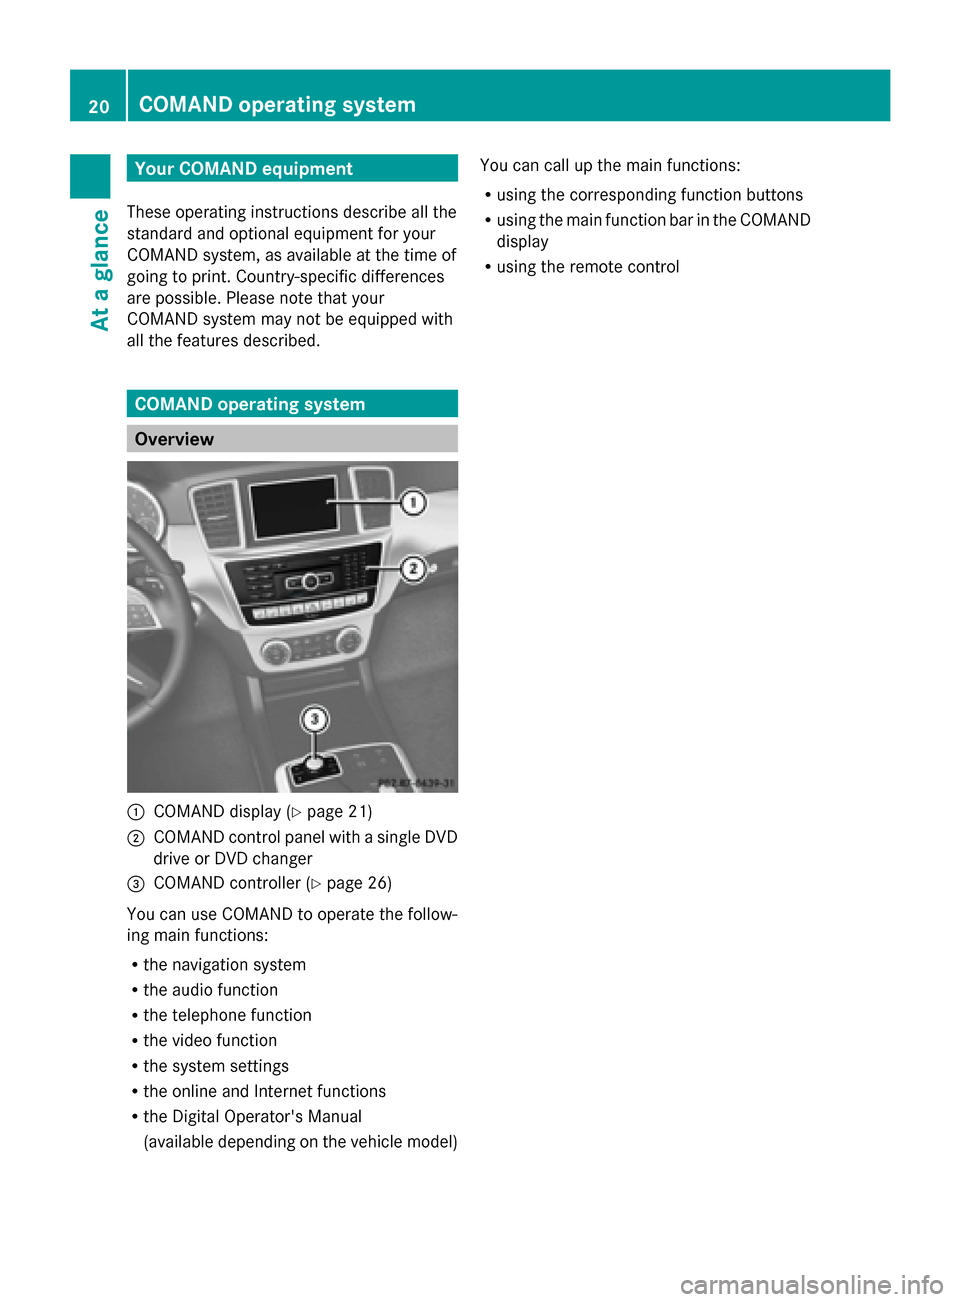 MERCEDES-BENZ M-Class 2014 W166 Comand Manual Your COMAND equipment
These operating instructions describe all the
standard and optional equipment for your
COMAND system, as available at the time of
going to print. Country-specific differences
are